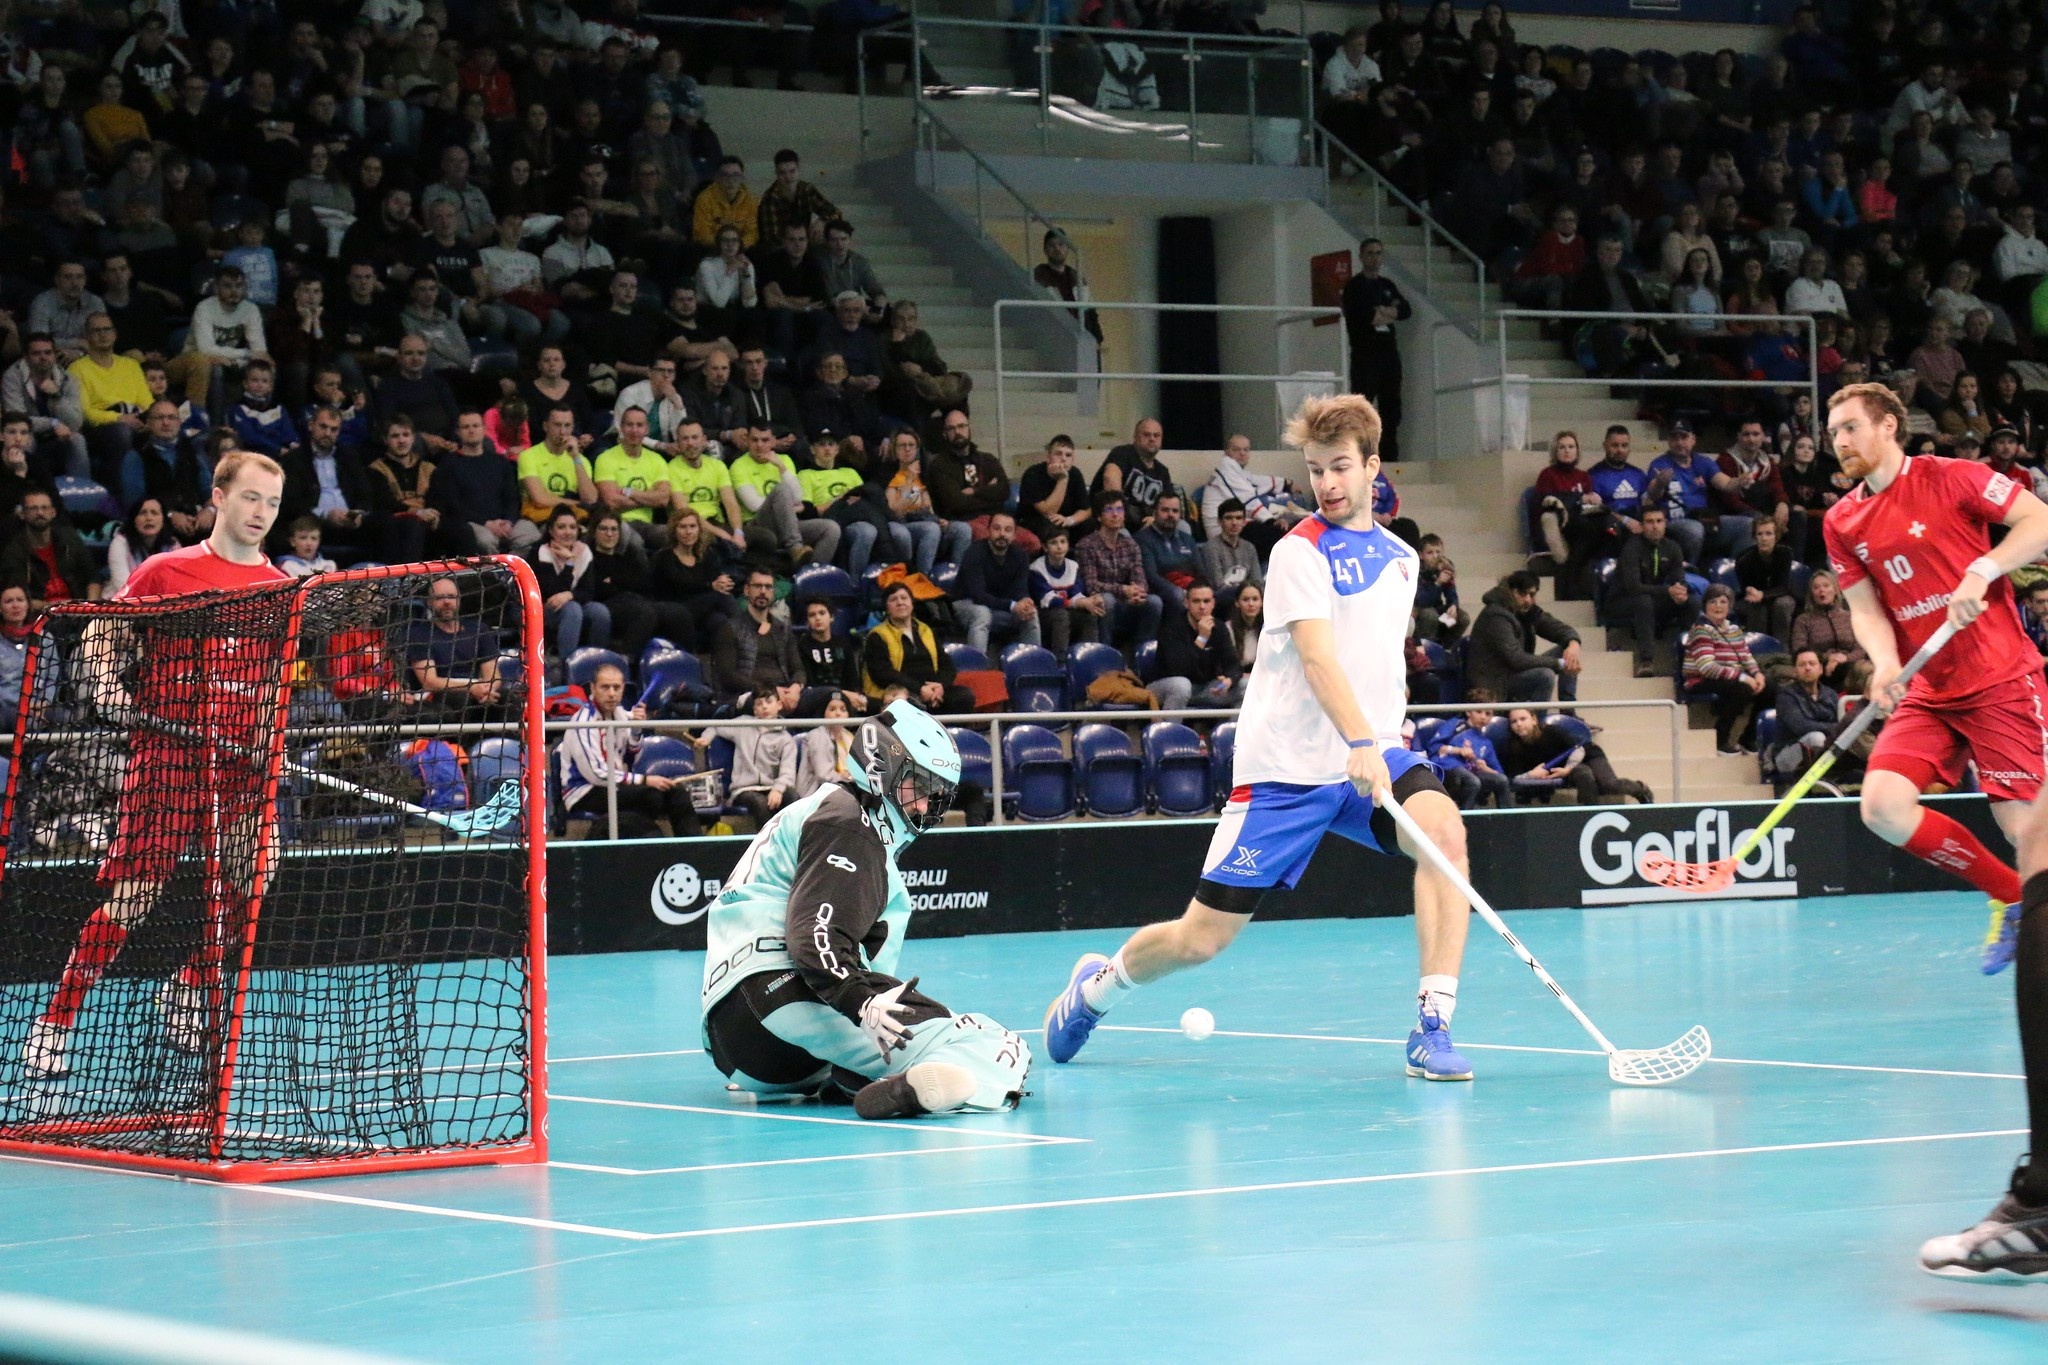 Floorball: A goalkeeper tries to catch the ball during the WFC 2020 qualifications game. 2050x1370 HD Wallpaper.